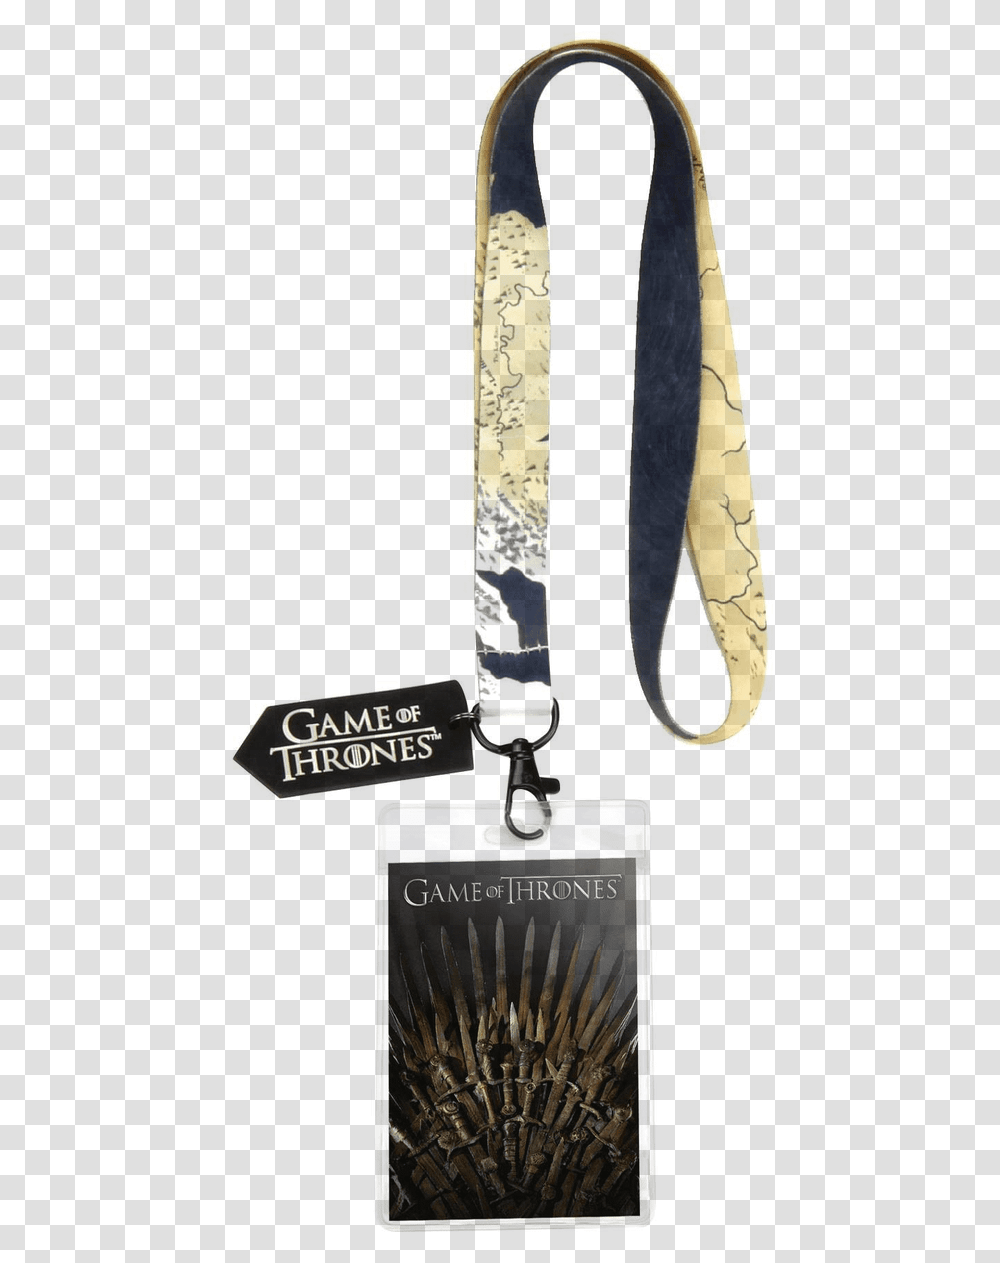 Http Store Svx5q Mybigcommerce Comproduct Game Of Thrones, Trophy, Gold, Gold Medal, Crystal Transparent Png